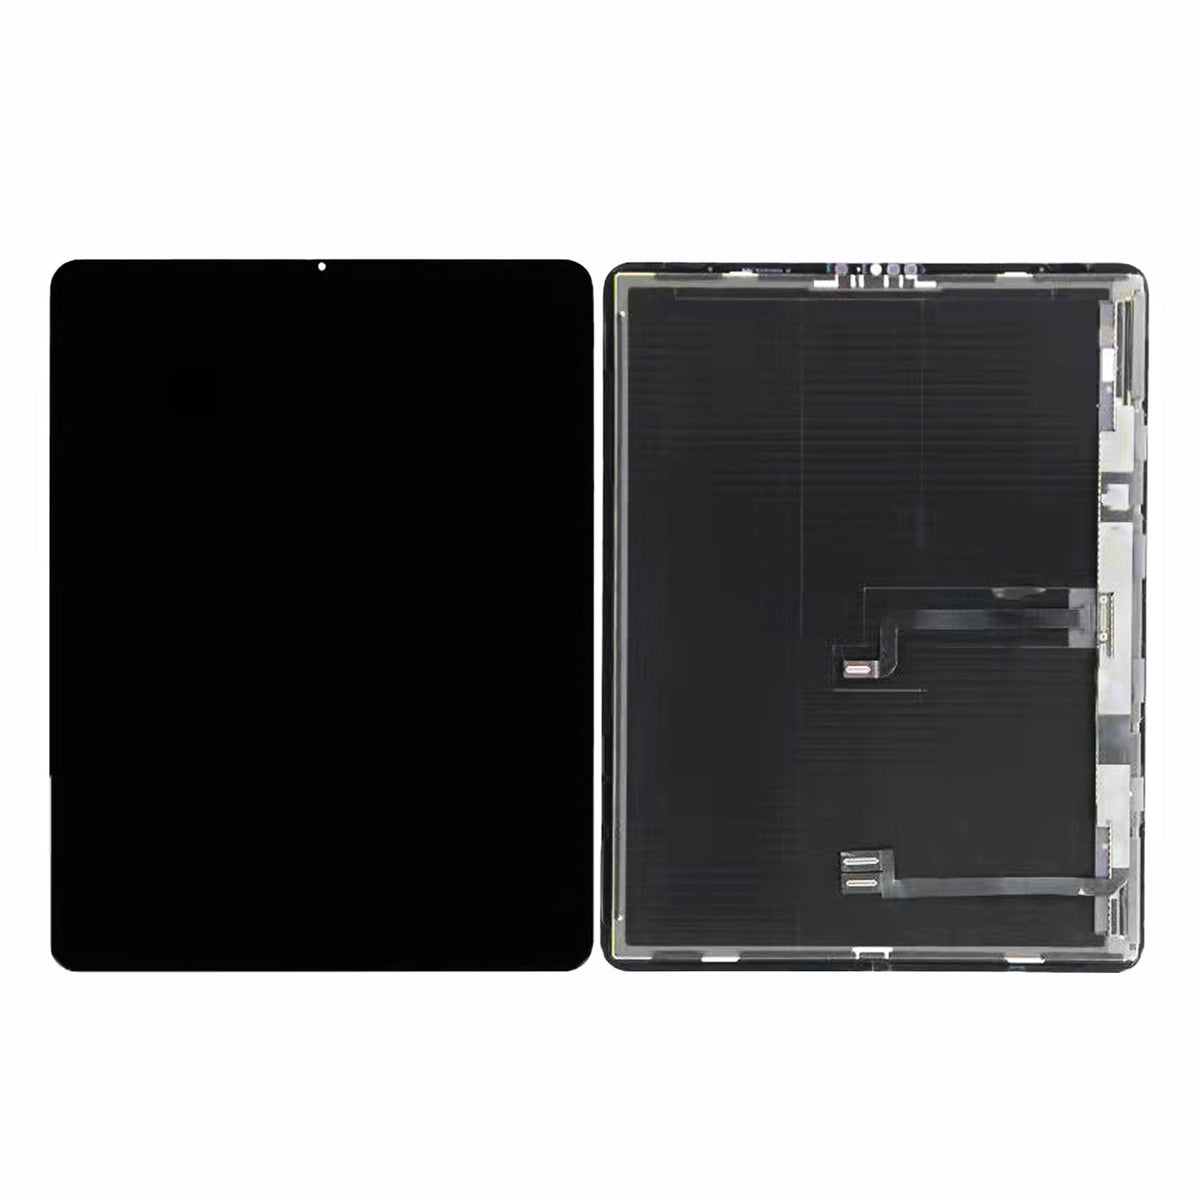 IPad Pro 12.9 5th Generation LCD Screen replacement